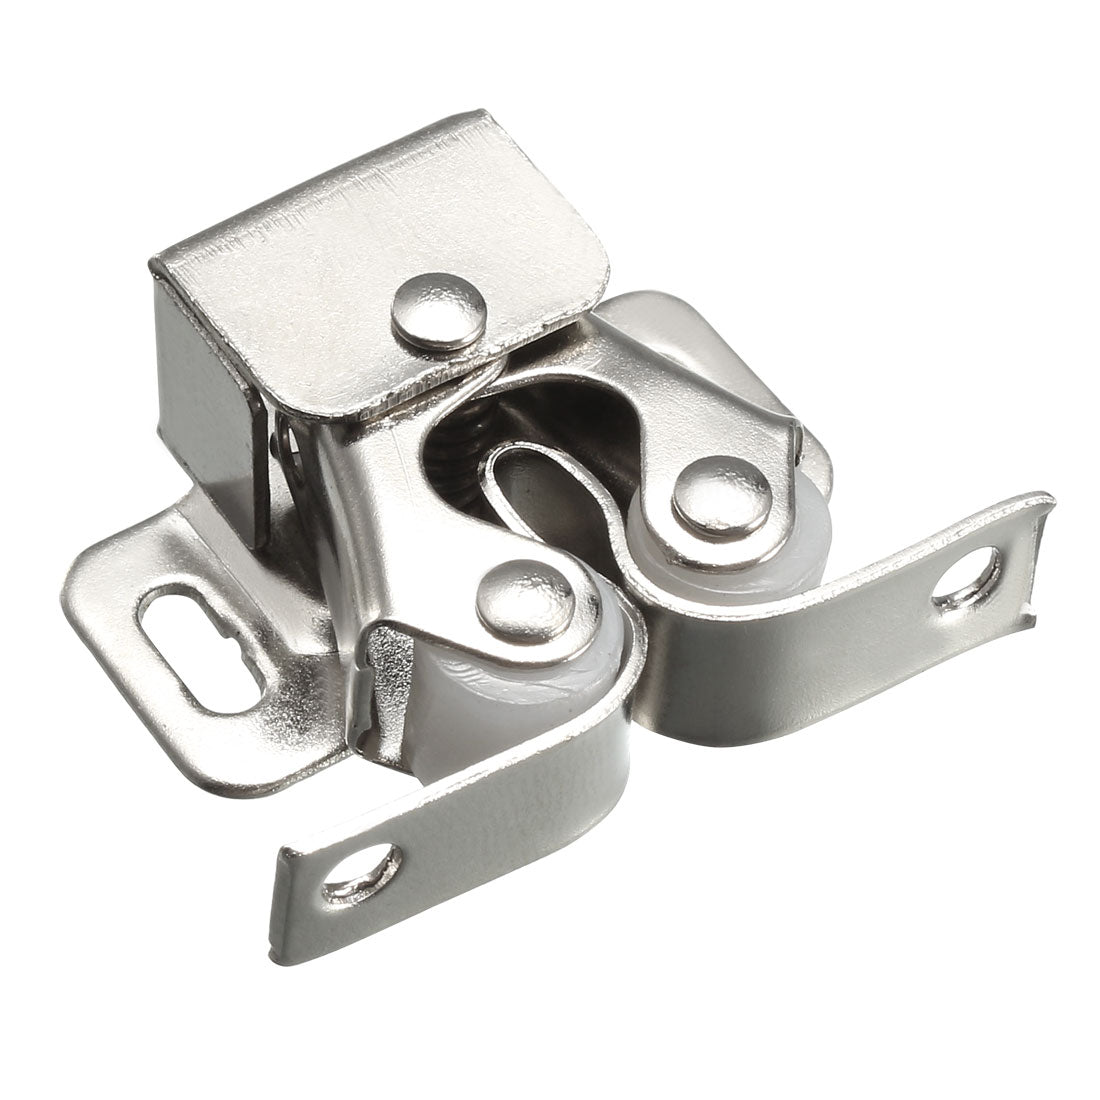 uxcell Uxcell Cabinet Door Double Roller Catch Ball Latch with Prong Hardware, Silver 2pcs